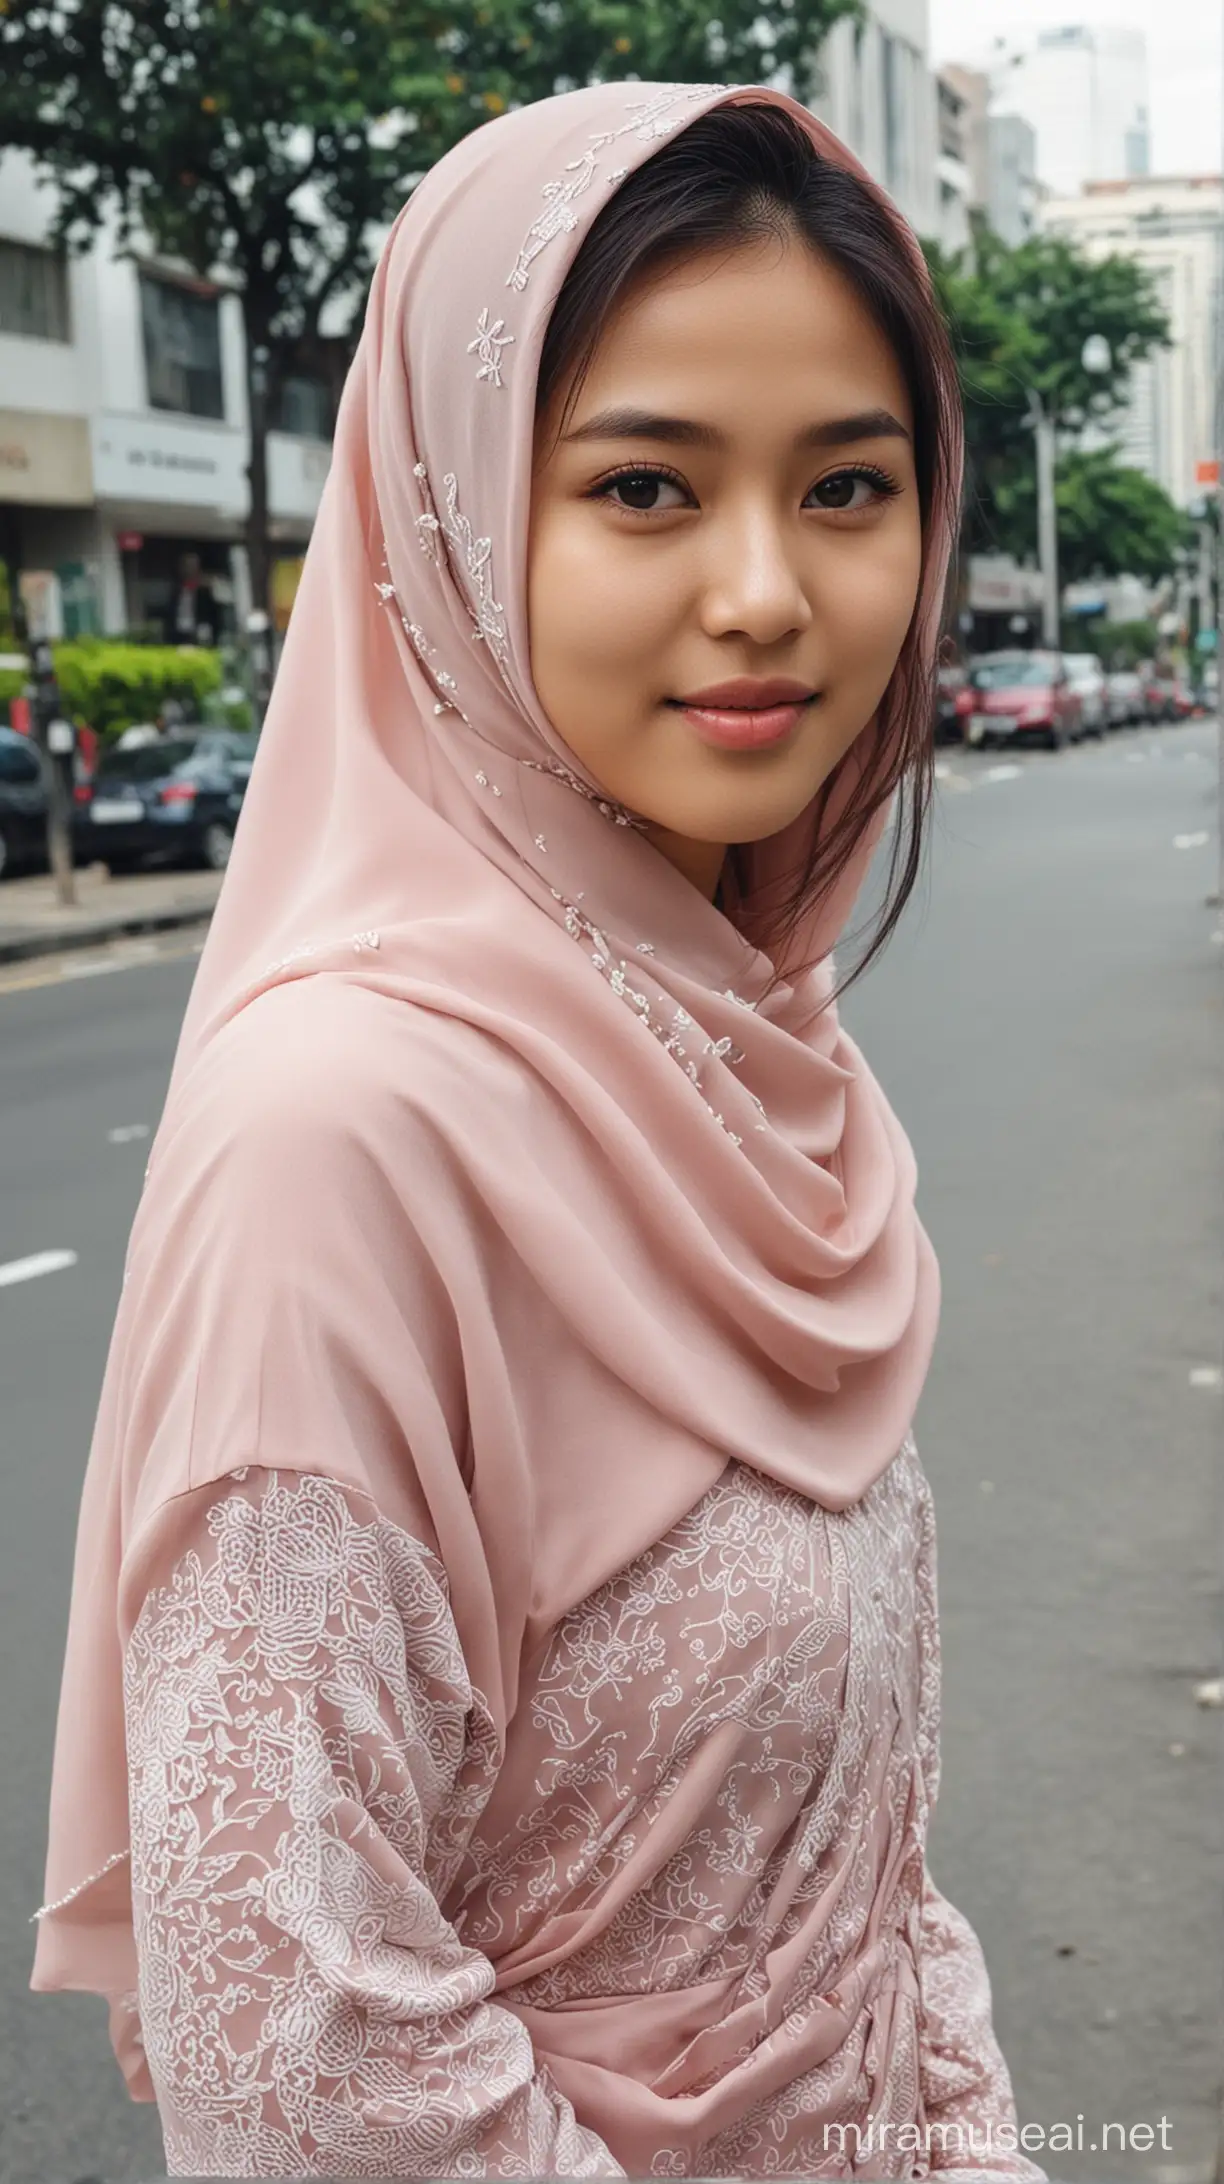 Stylish Indonesian Muslim Woman with Koreaninspired Outfit in Jakarta Streets